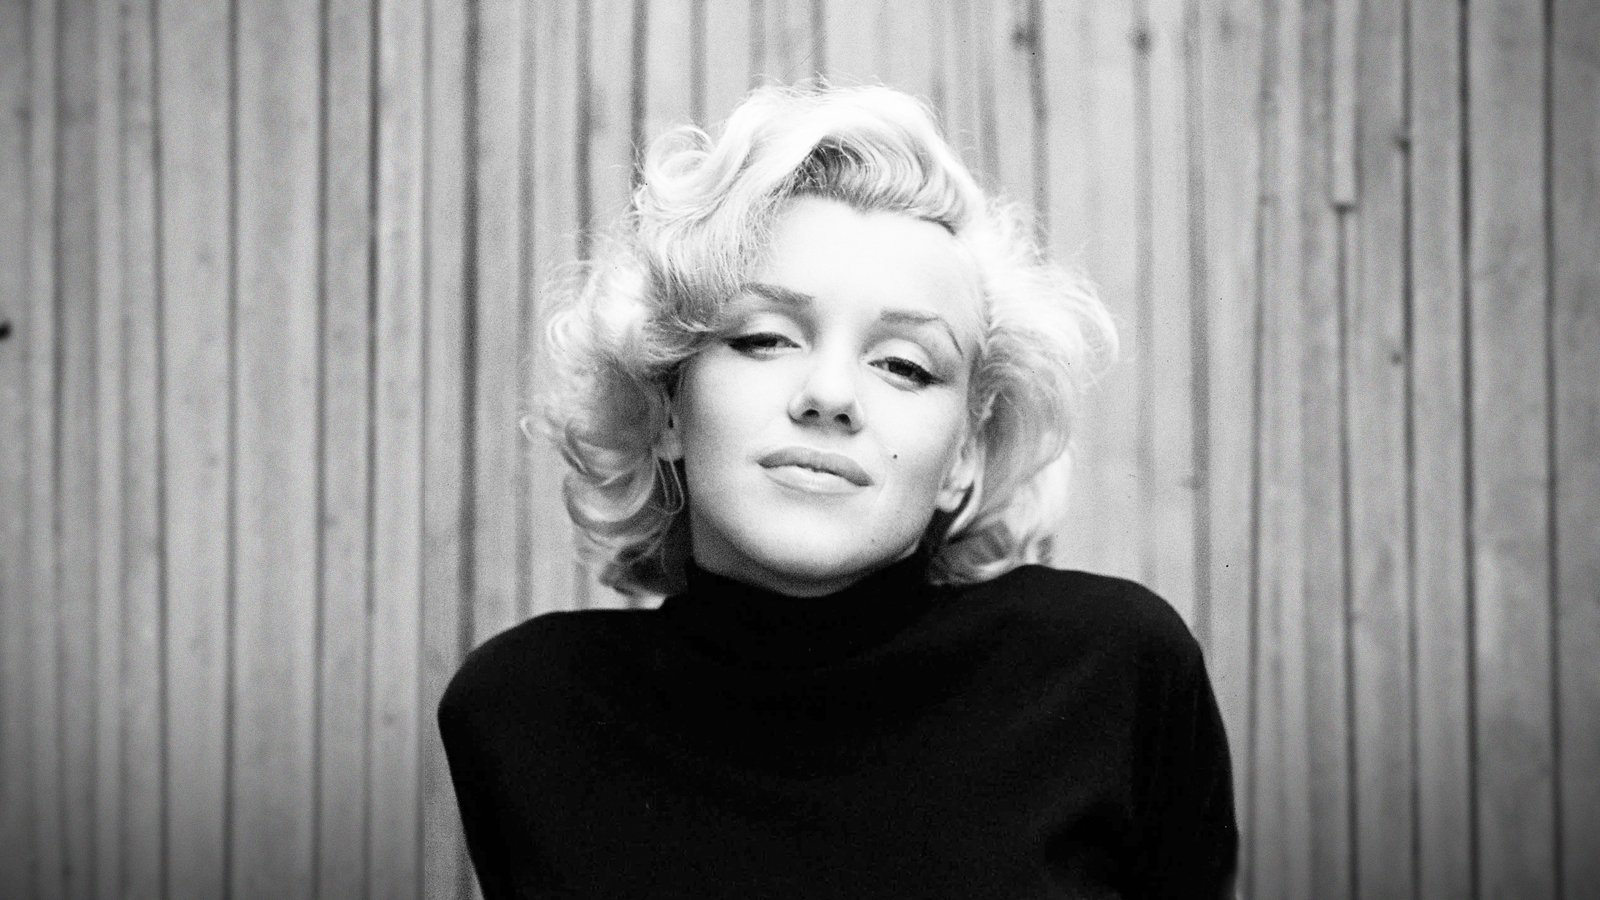 who played marilyn monroe in the screen biography goodbye norma jean 1975